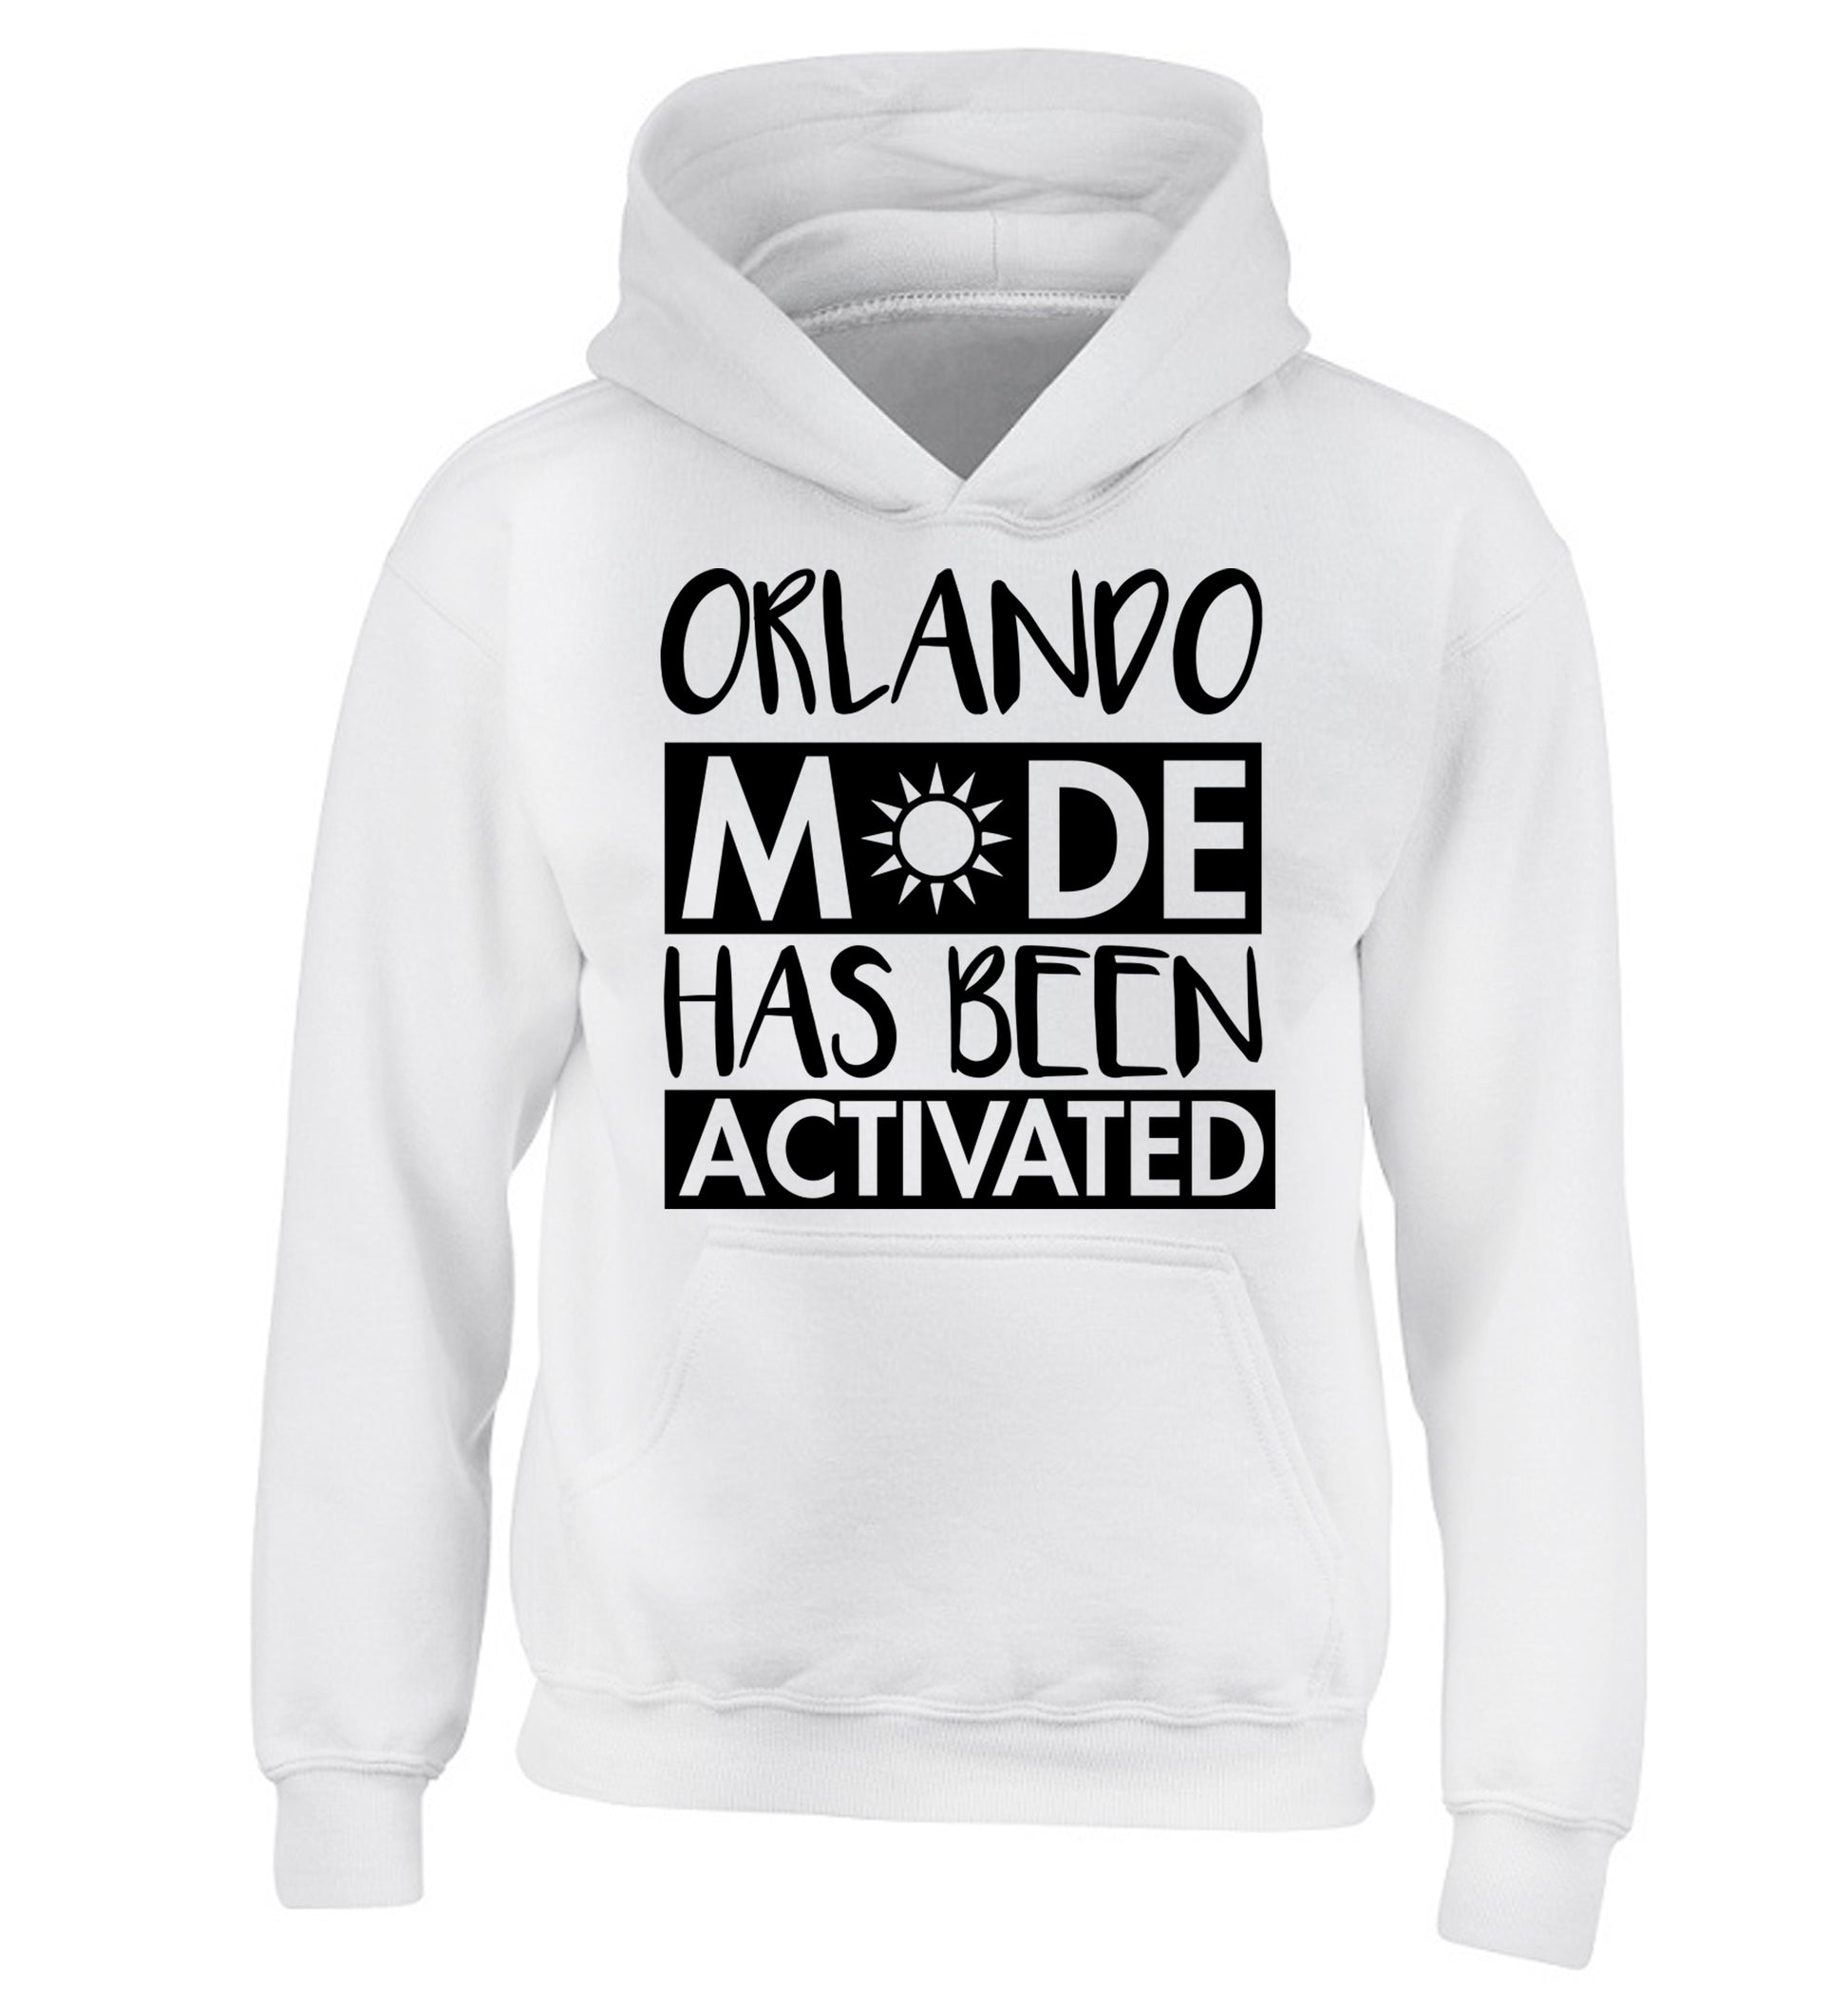 Orlando mode has been activated children's white hoodie 12-13 Years